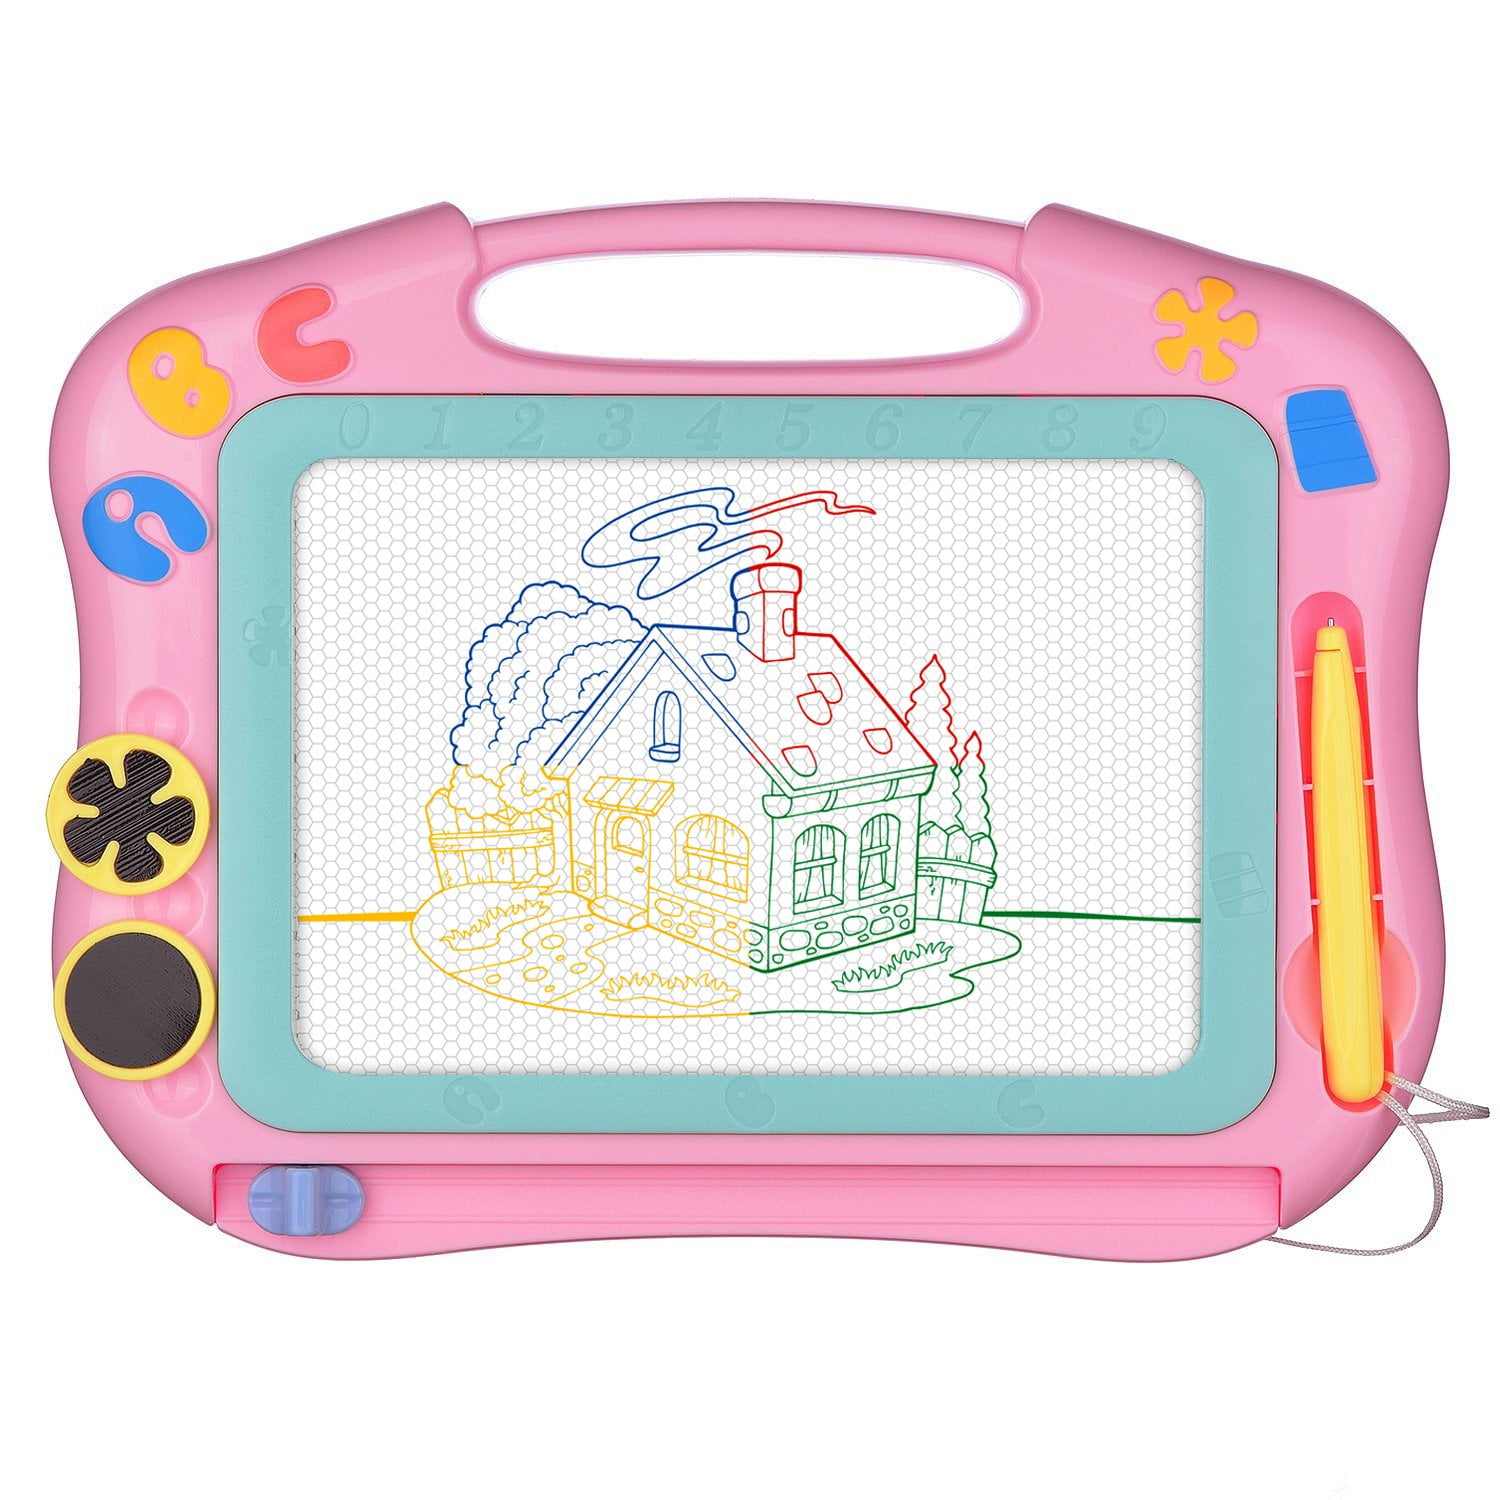 Fresion Magnetic Drawing Board Doodle Board，Travel Size Colorful and Creativity Sketching Pad with one Writing Tablet for 3 Year Old Kids Gifts 